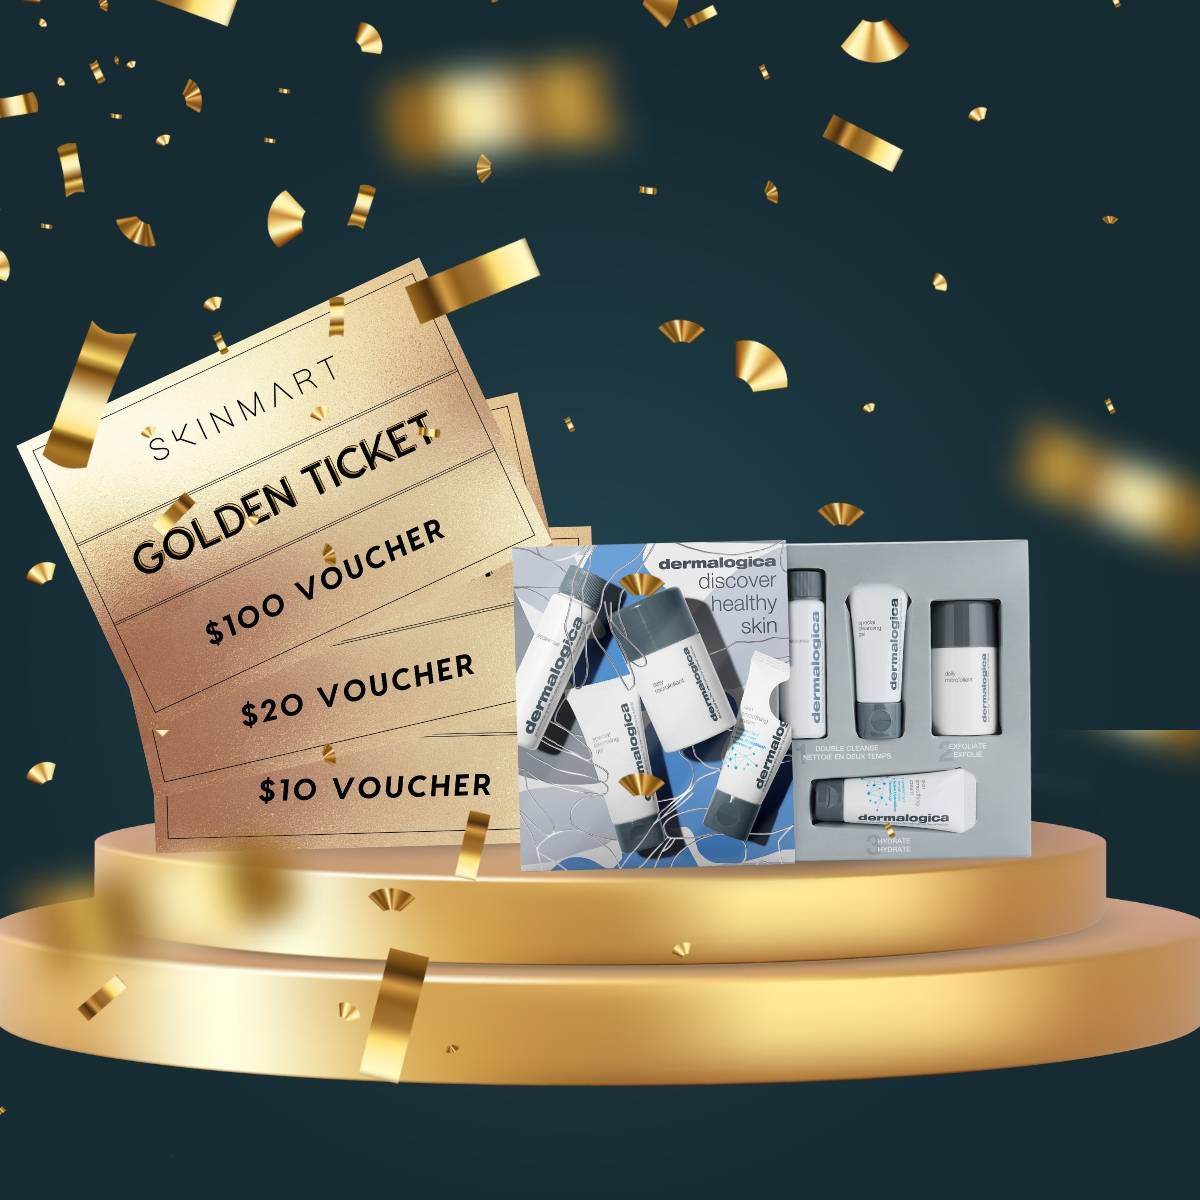 Image of Golden Ticket with complimentary vouchers and Discovery Kits on golden podium with golden confetti falling around it